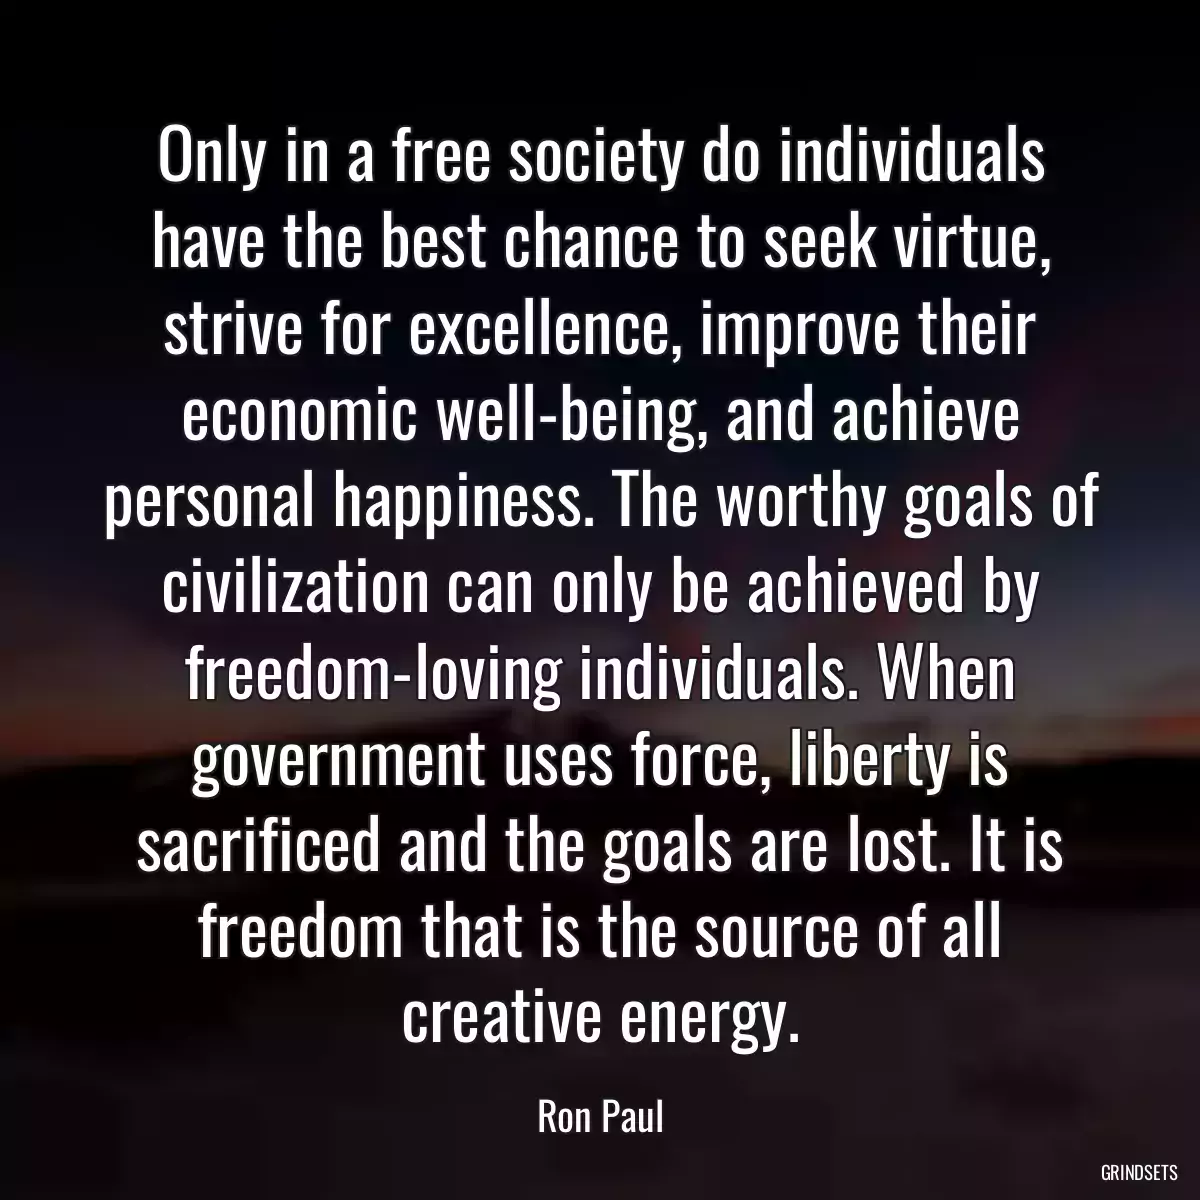 Only in a free society do individuals have the best chance to seek virtue, strive for excellence, improve their economic well-being, and achieve personal happiness. The worthy goals of civilization can only be achieved by freedom-loving individuals. When government uses force, liberty is sacrificed and the goals are lost. It is freedom that is the source of all creative energy.